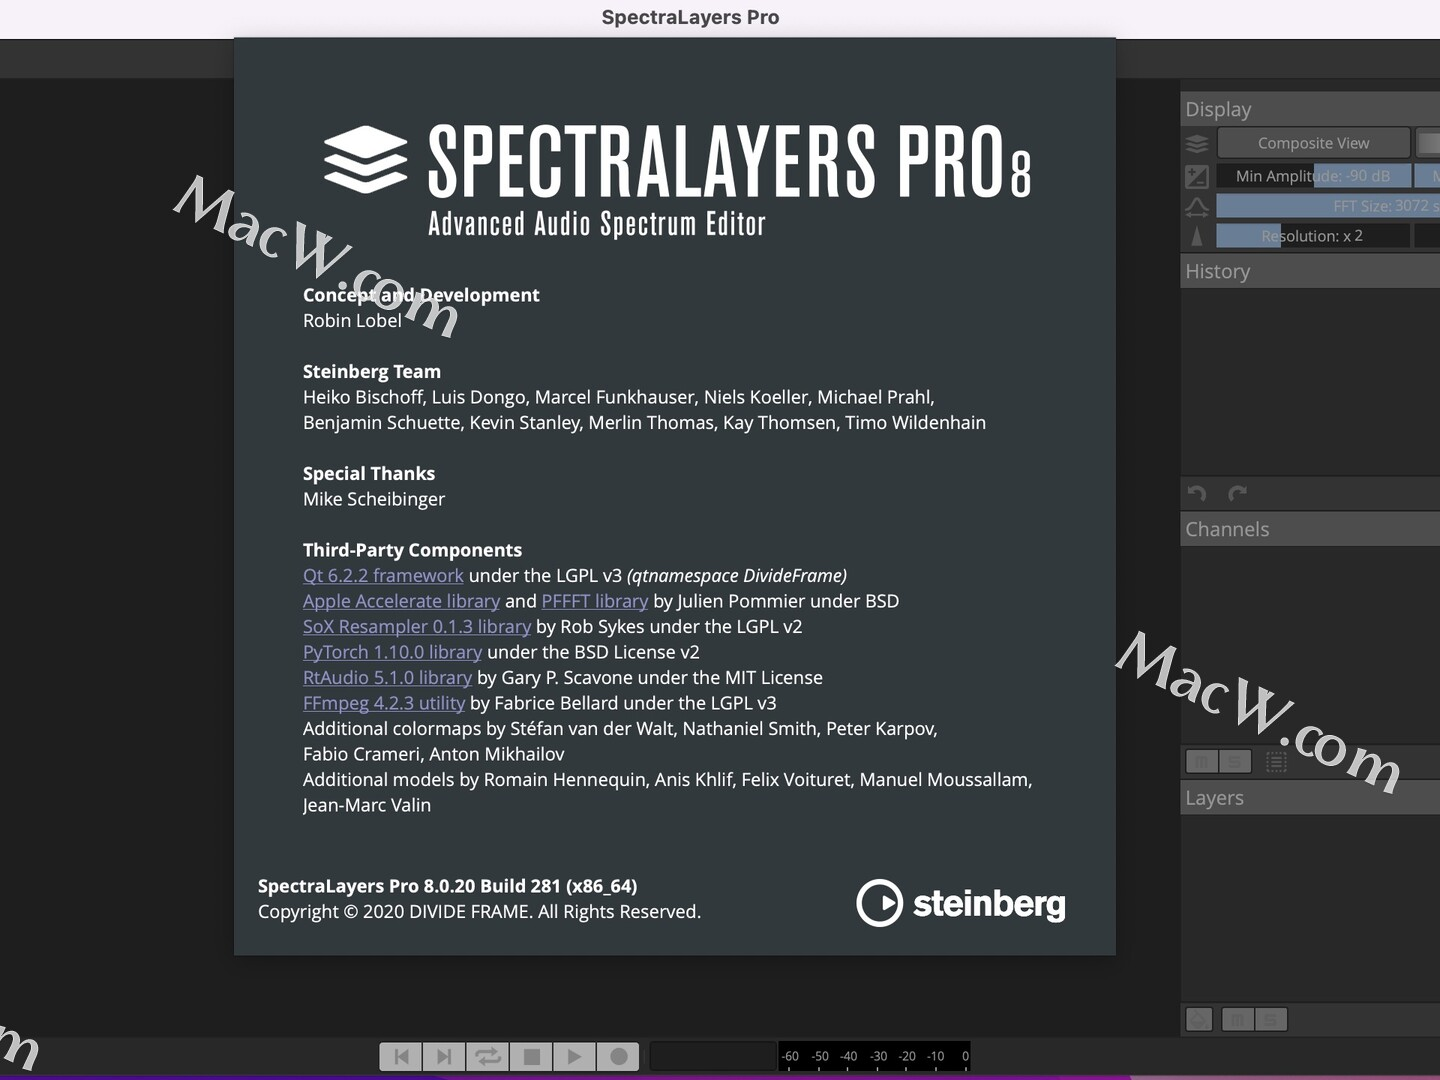 download the last version for mac MAGIX / Steinberg SpectraLayers Pro 10.0.30.334